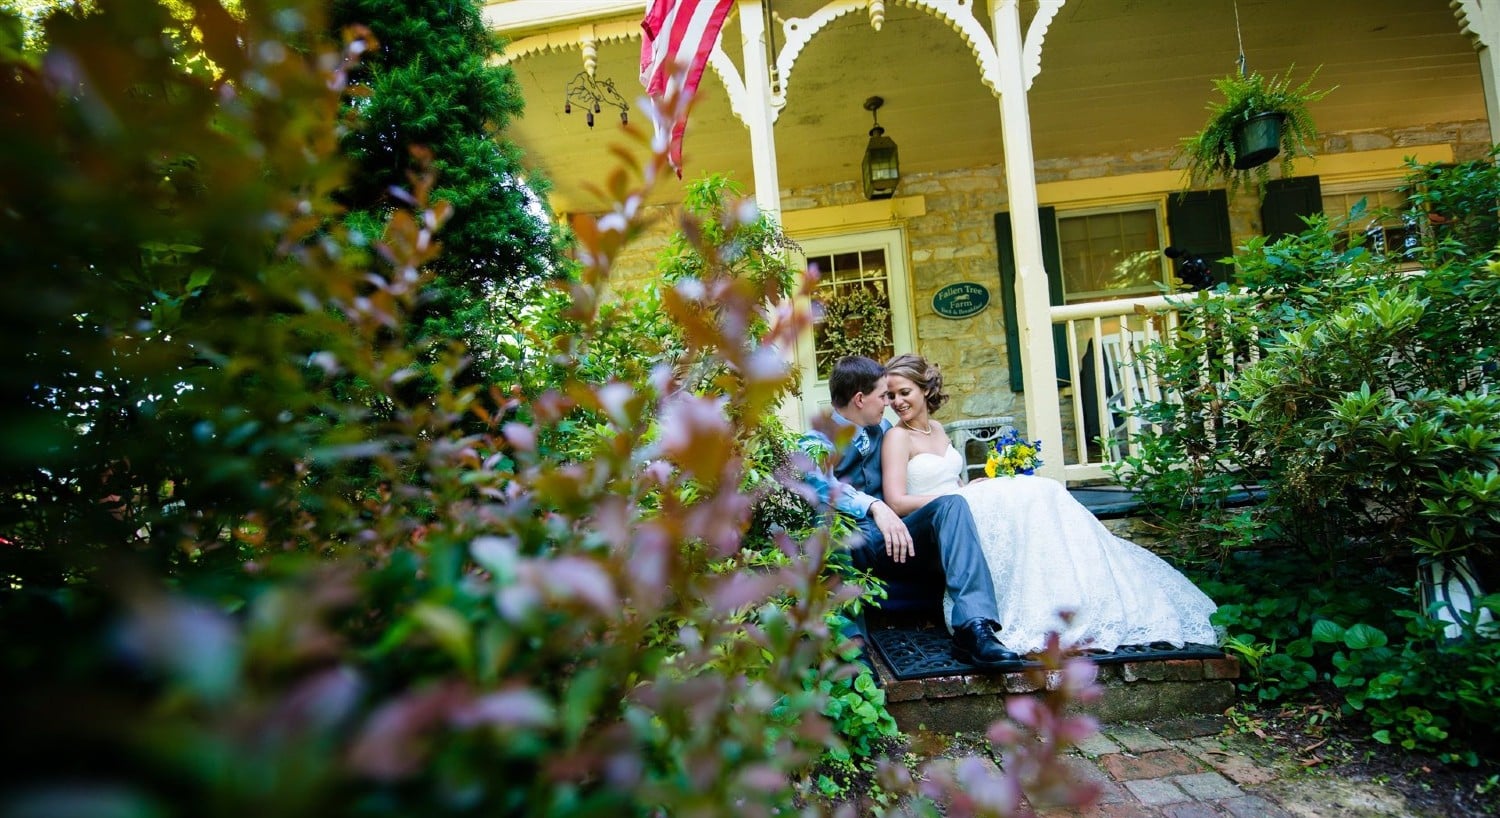 View through trees of a bride and groom sitting on a front porch of a home